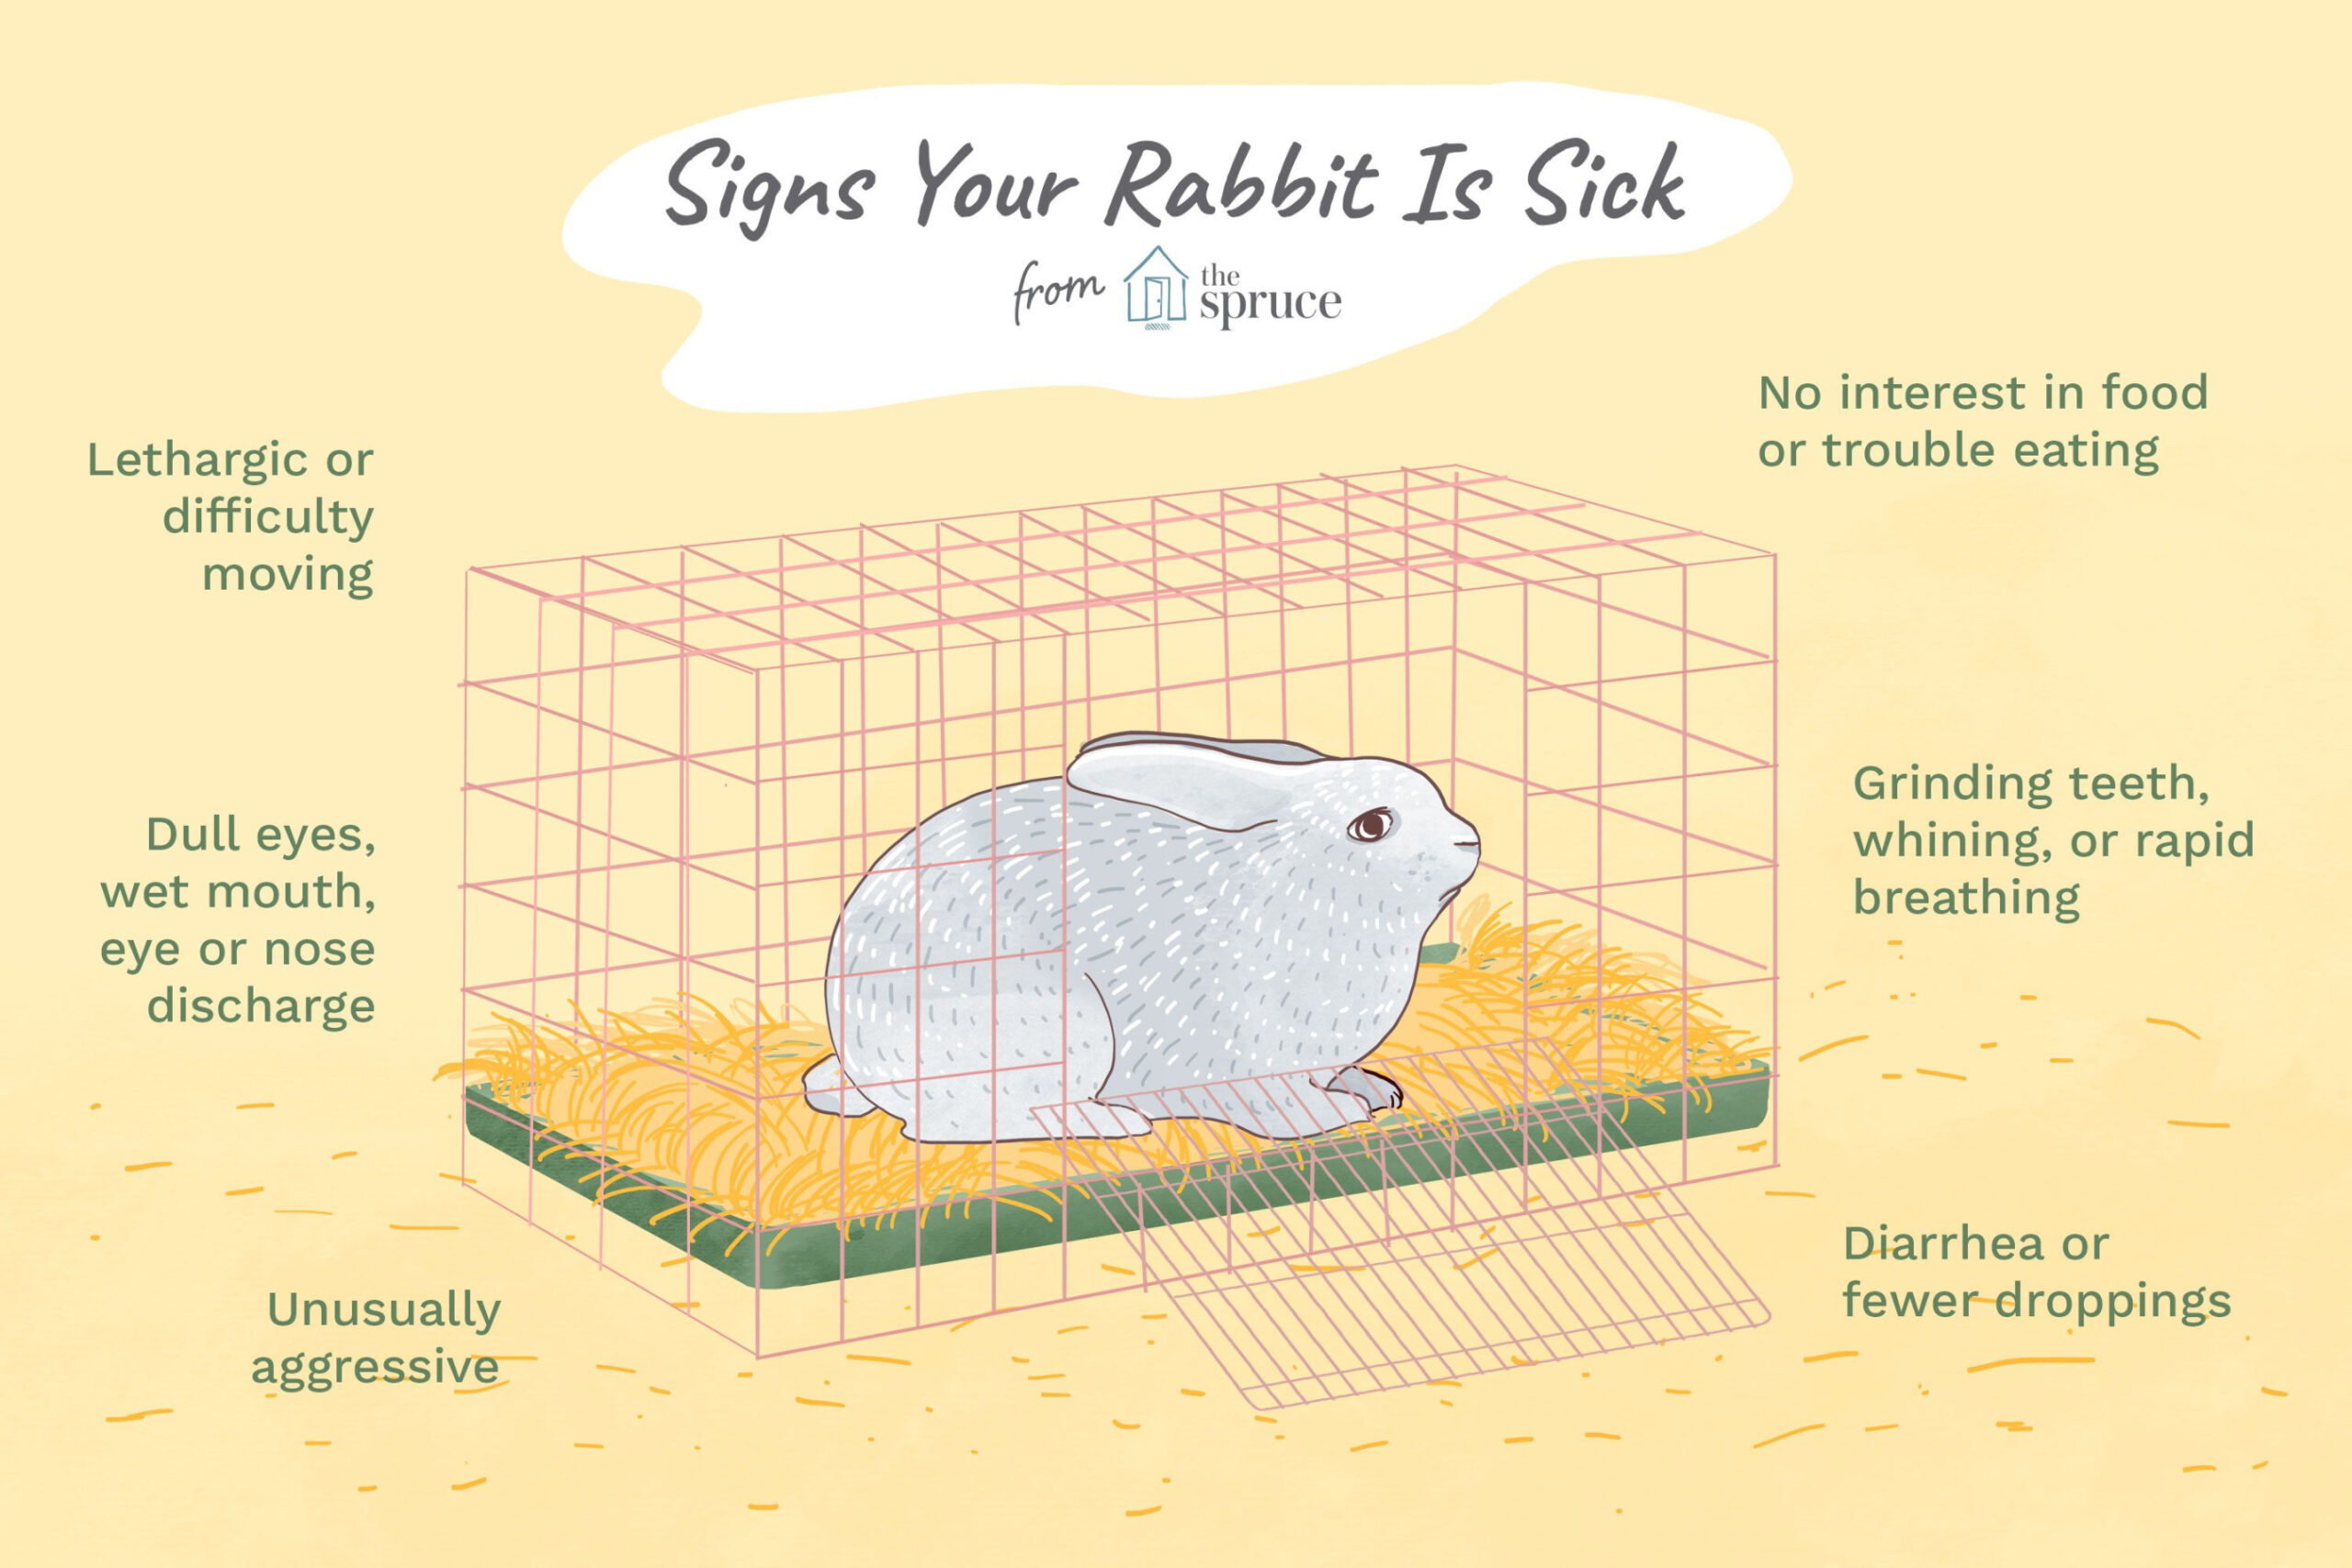 What to Do If Your Rabbit Is Sick